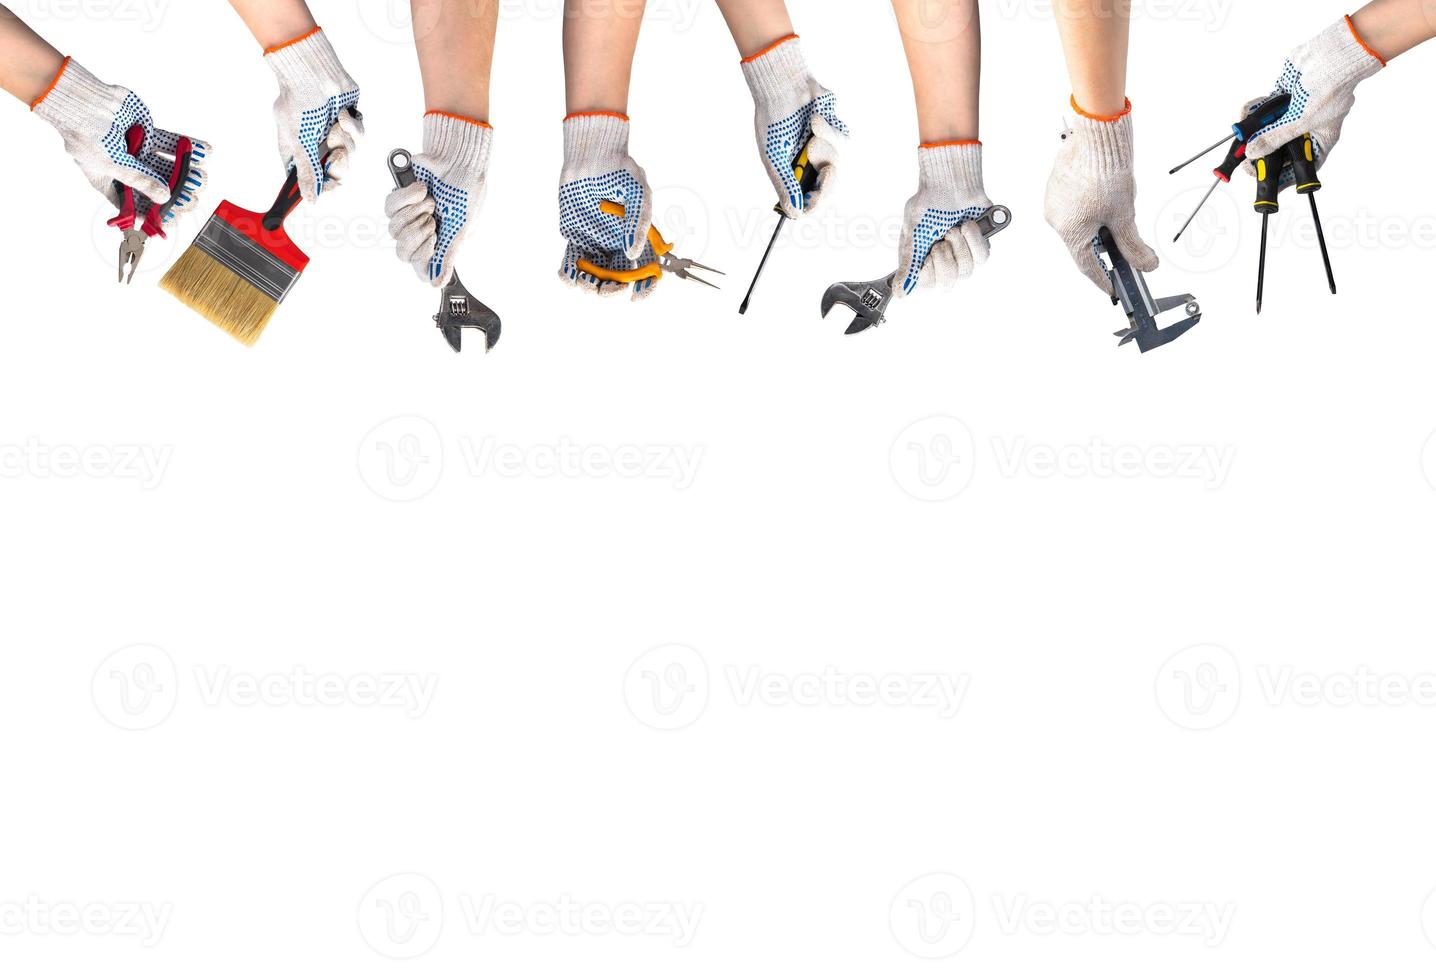 Happy labor day concept. Hands in work gloves hold tools for repair and construction. Wrench, screwdriver, paintbrush, pliers on white background. photo